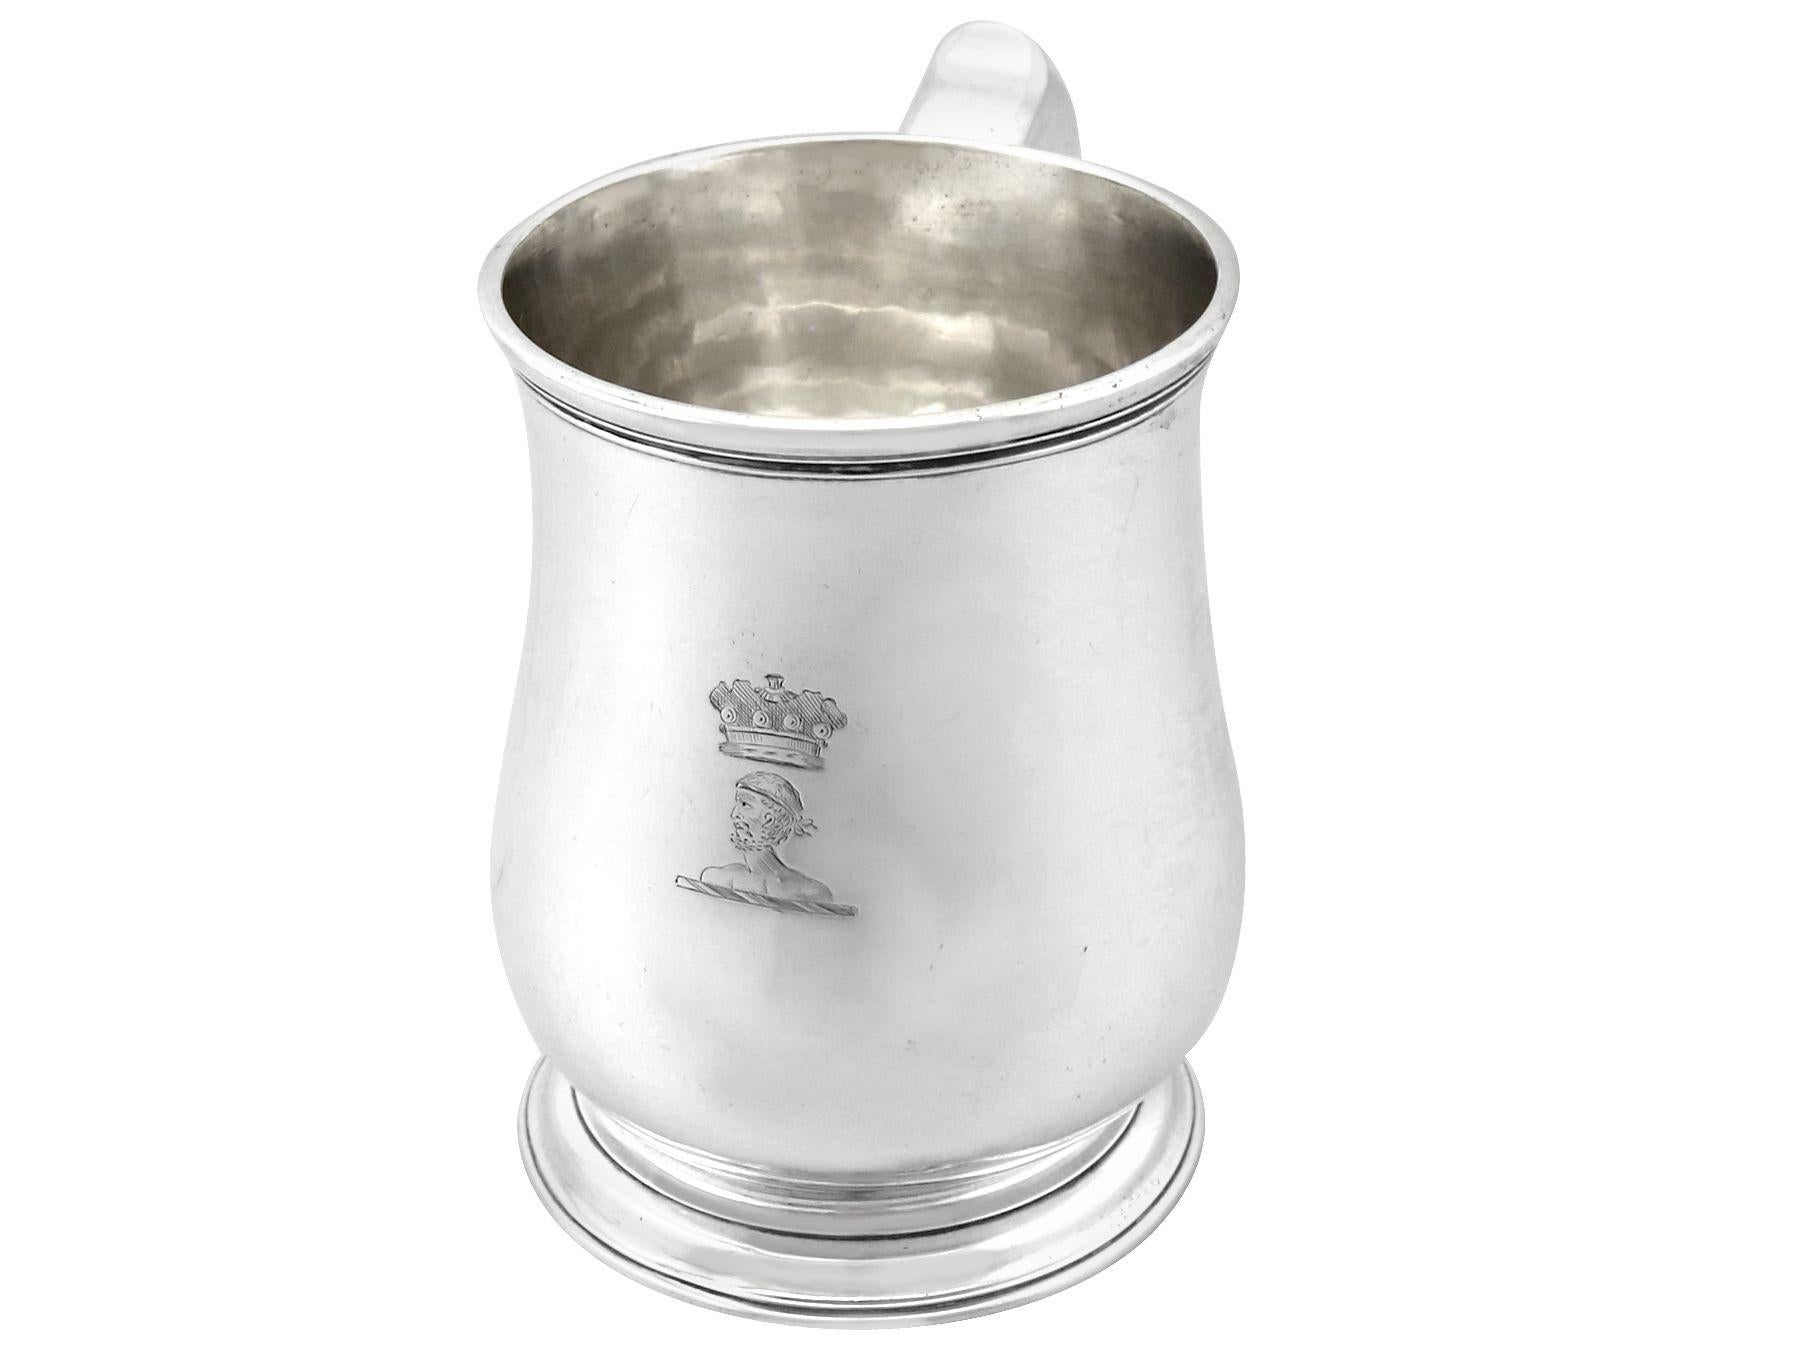 An exceptional, fine and impressive antique George II English sterling silver lady's mug by Gabriel Sleath; an addition to our Georgian silverware collection.

This exceptional antique early George II sterling silver mug has a plain baluster